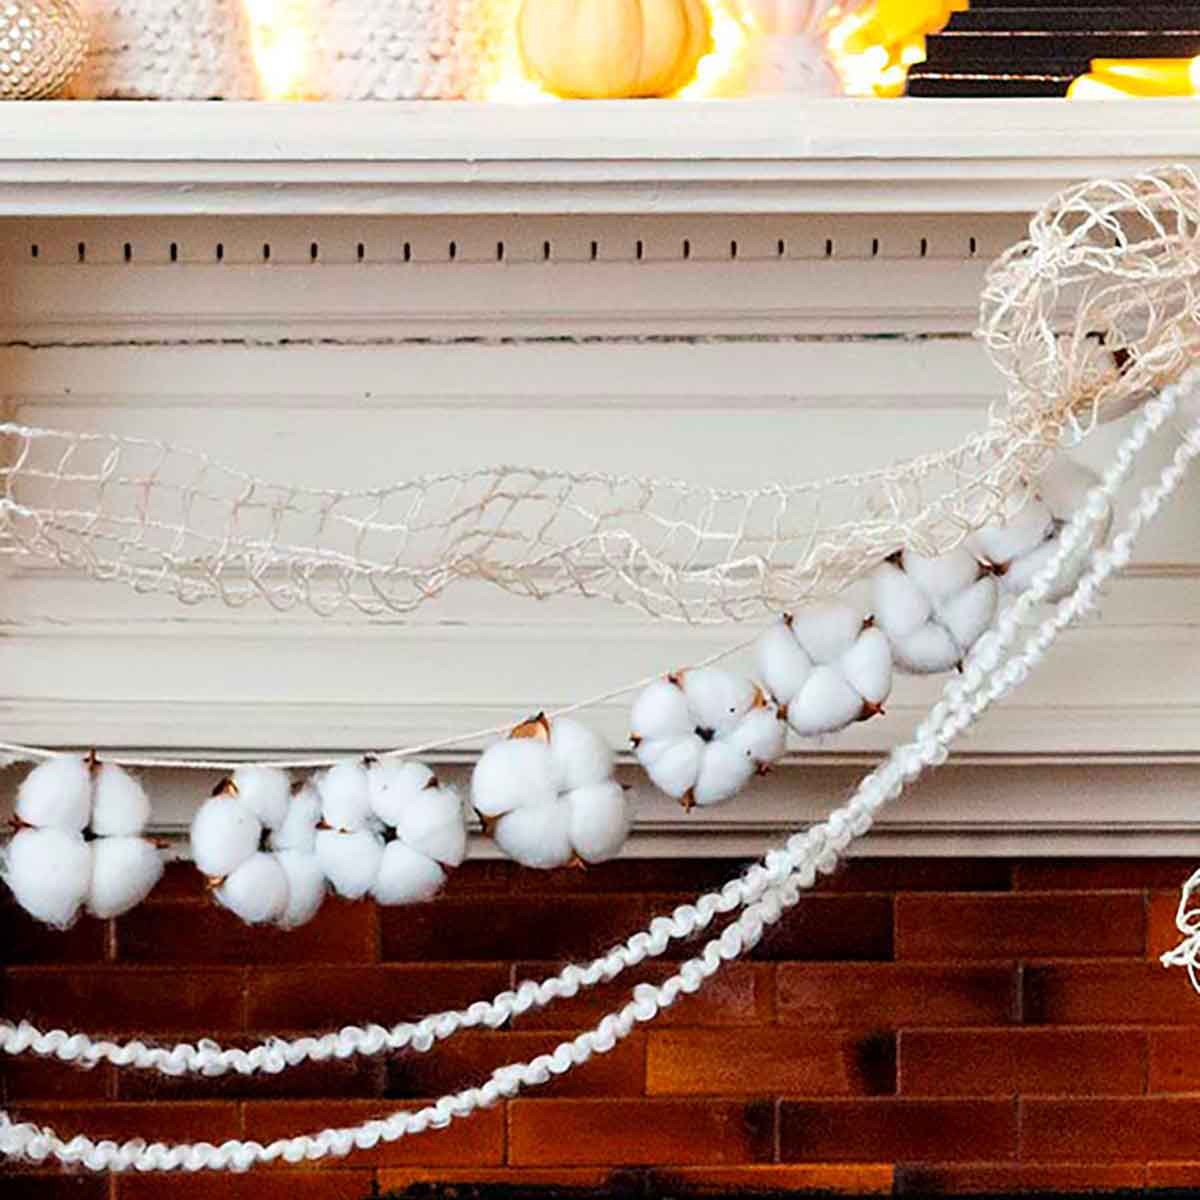 Cotton garland strung on a mantle with yarn and ribbon.